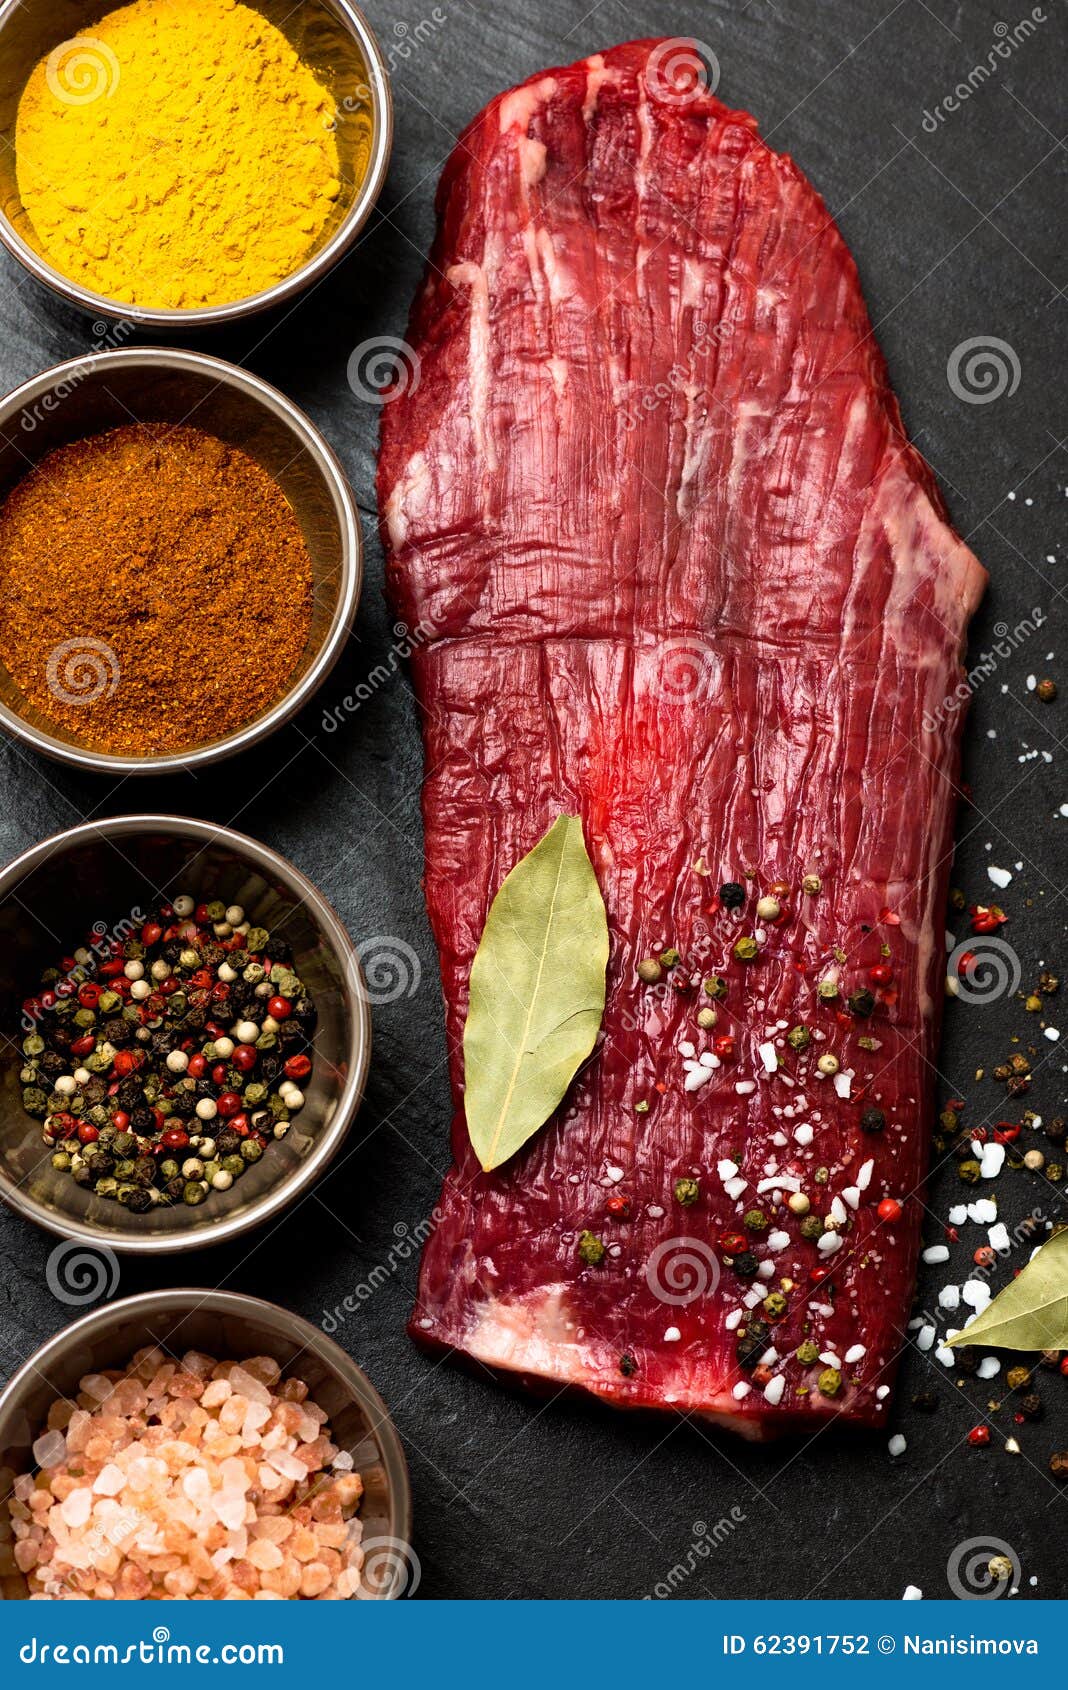 spices in bowls and raw flank steak